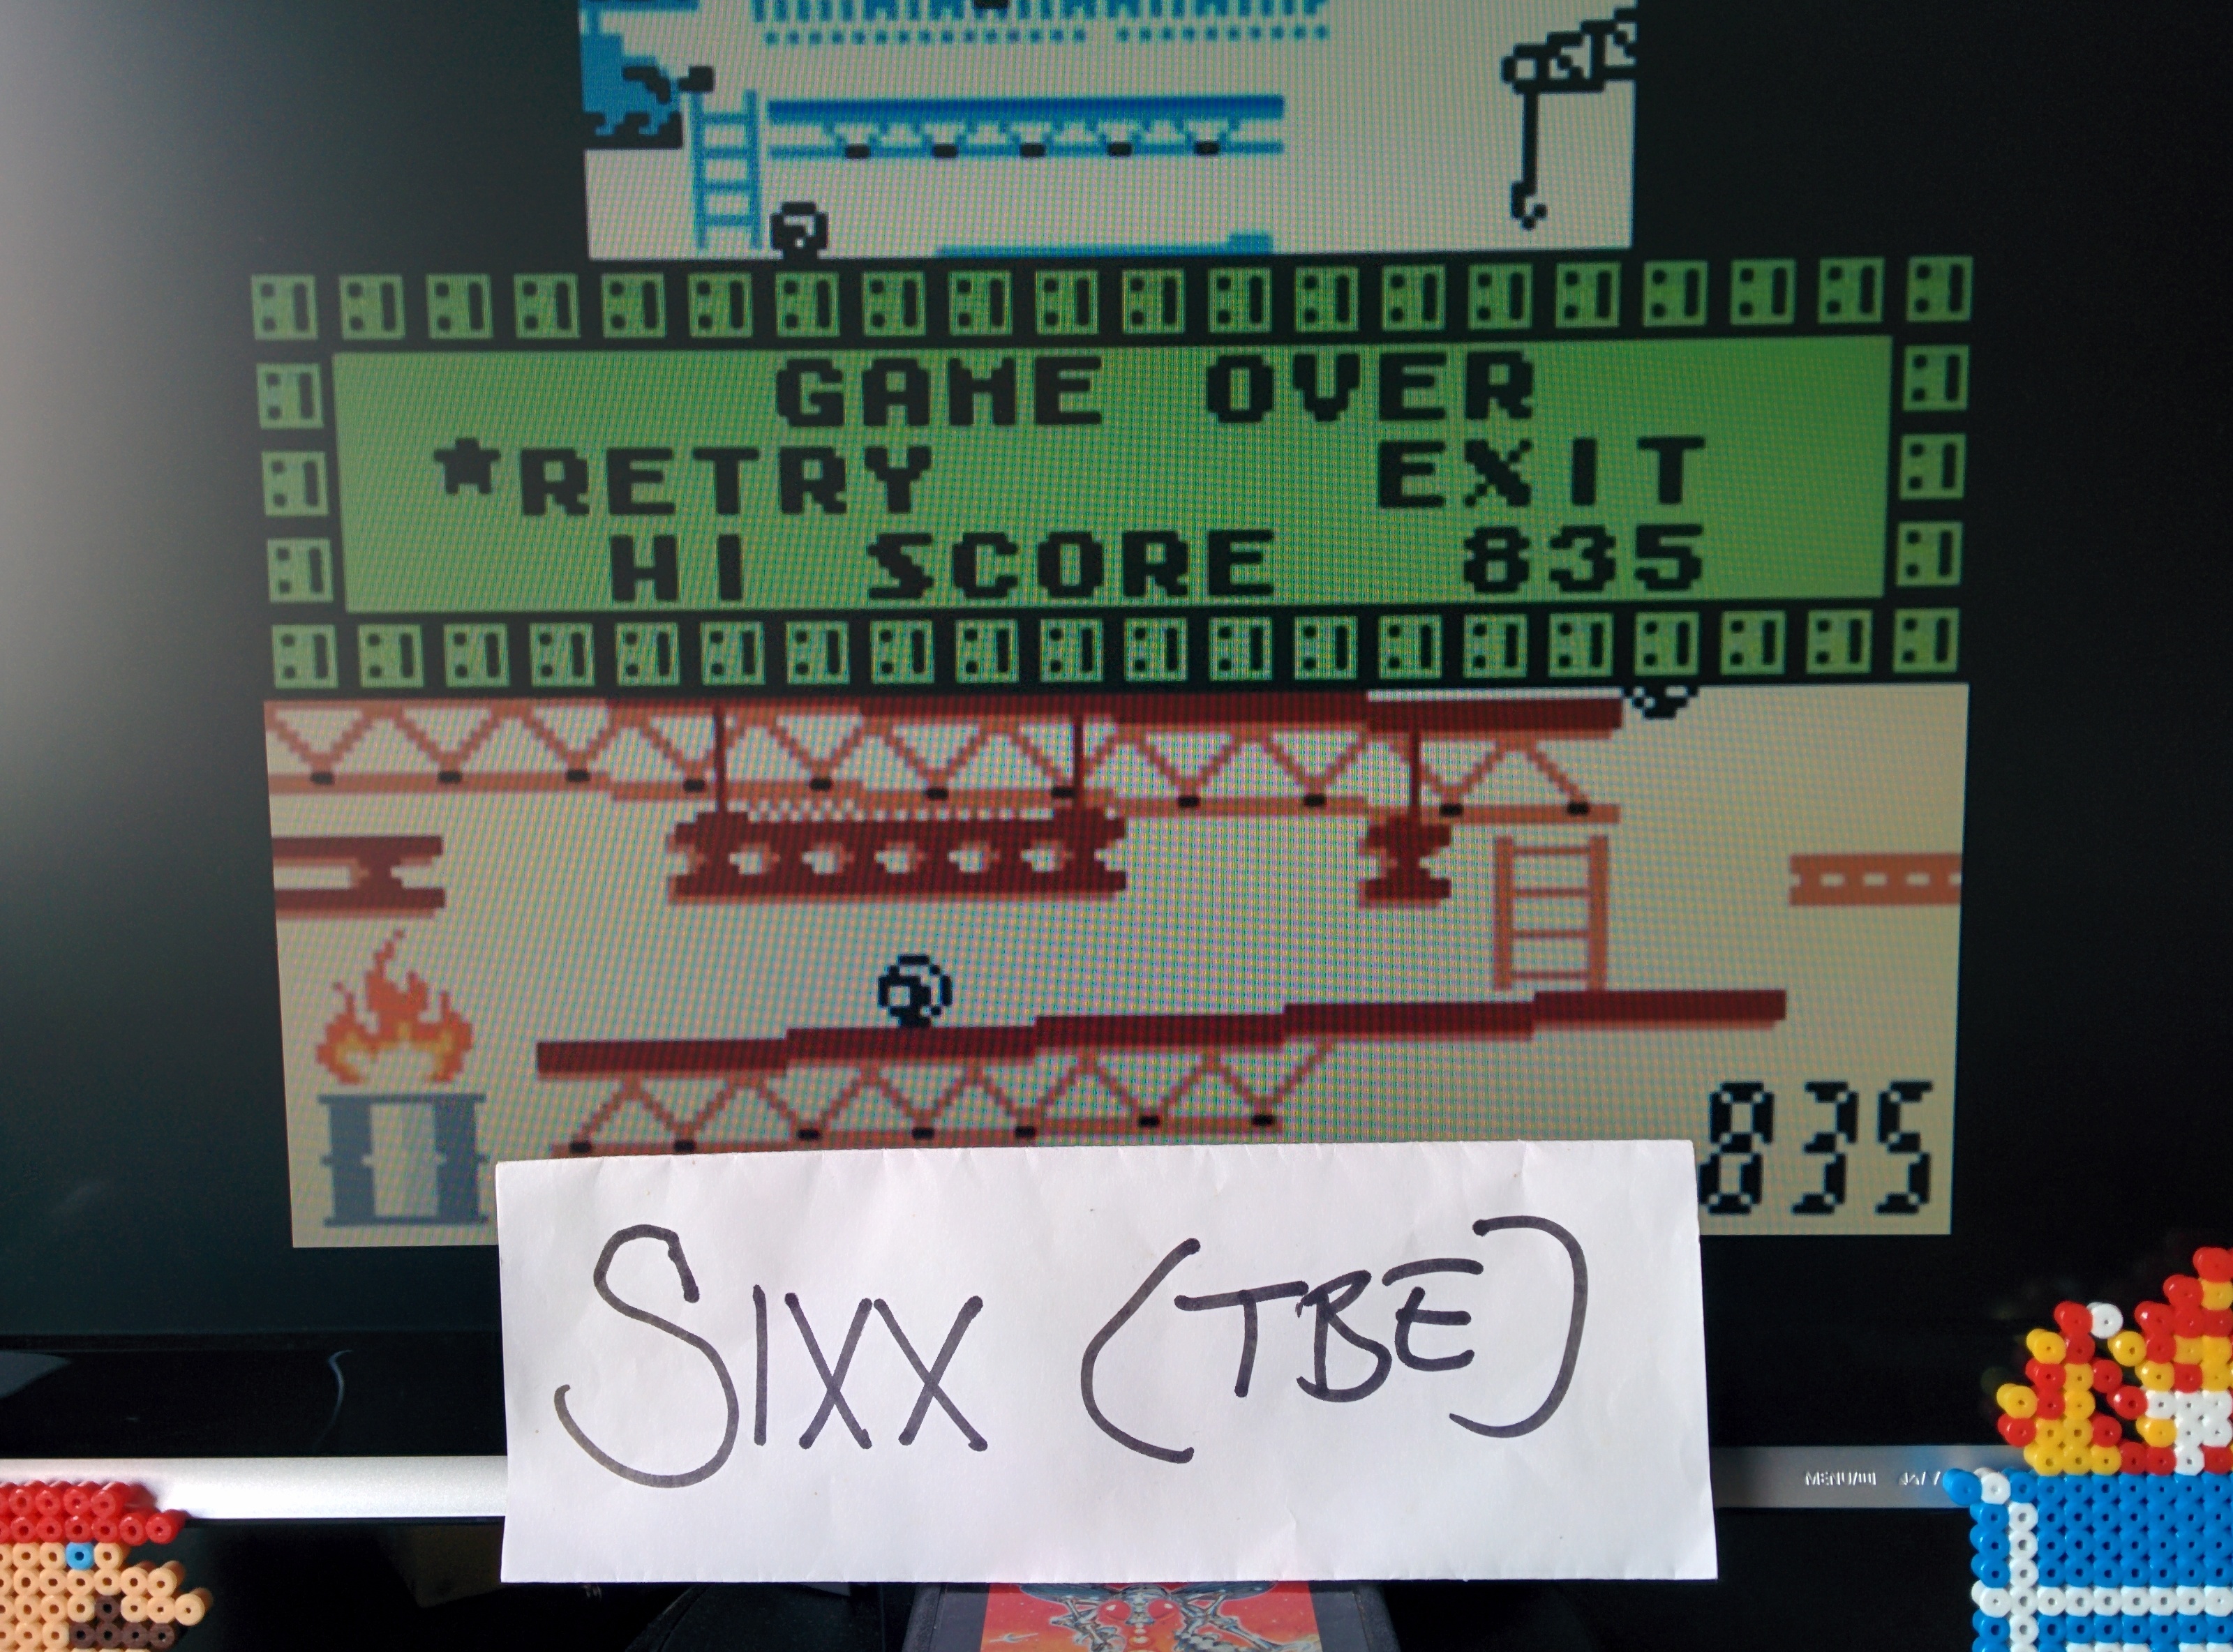 Sixx: Game & Watch Gallery 2: Donkey Kong: Classic: Easy (Game Boy Color Emulated) 835 points on 2014-08-14 03:18:55